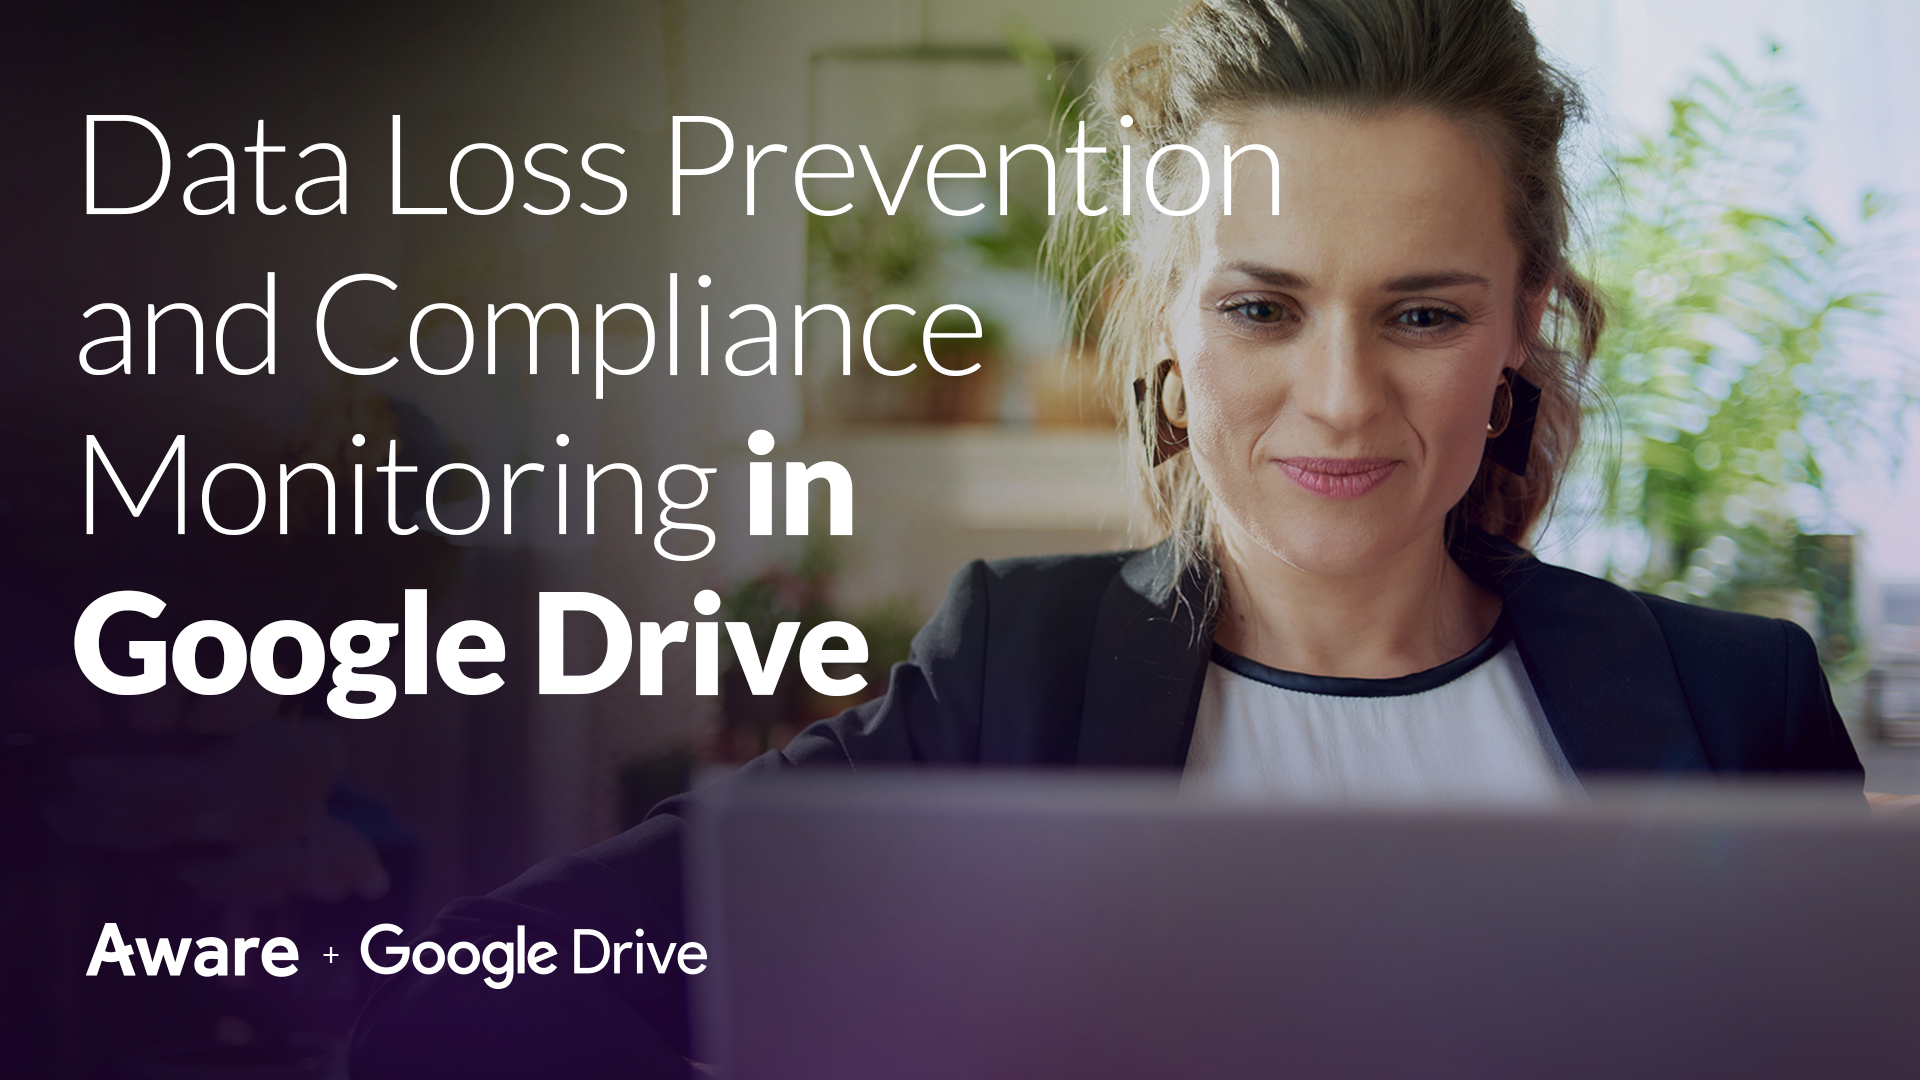 Data Loss Prevention and Compliance Adherence in Google Drive